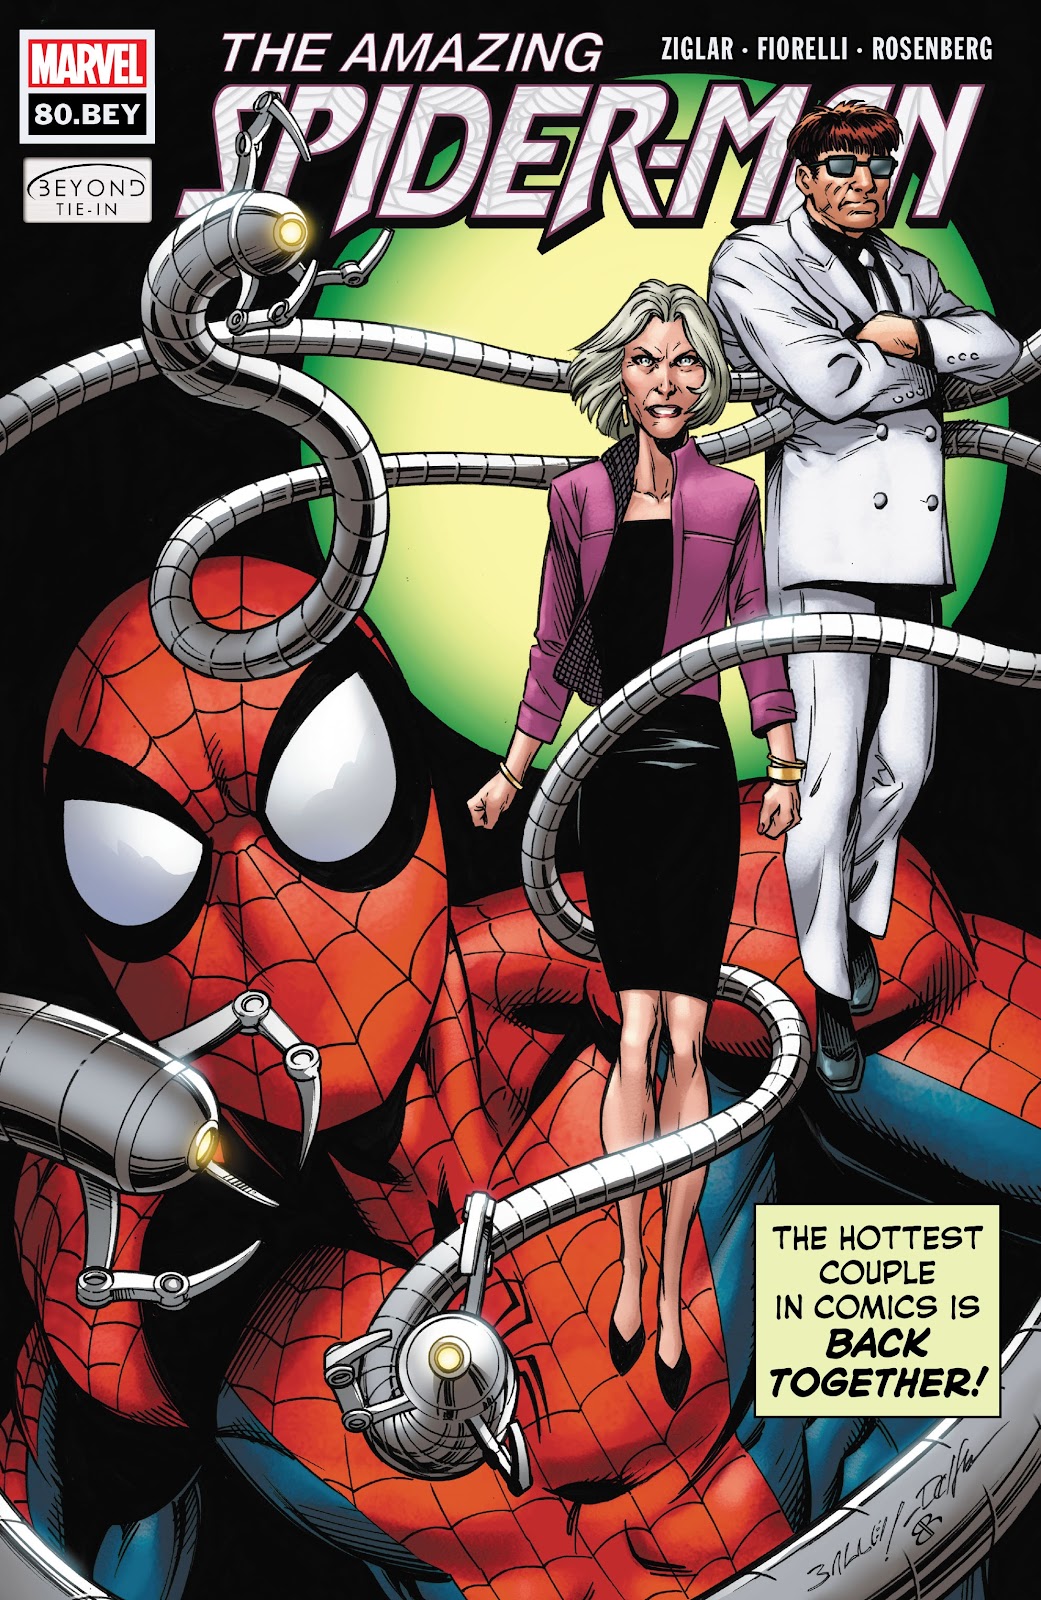 The Amazing Spider-Man (2018) issue 80.BEY - Page 1